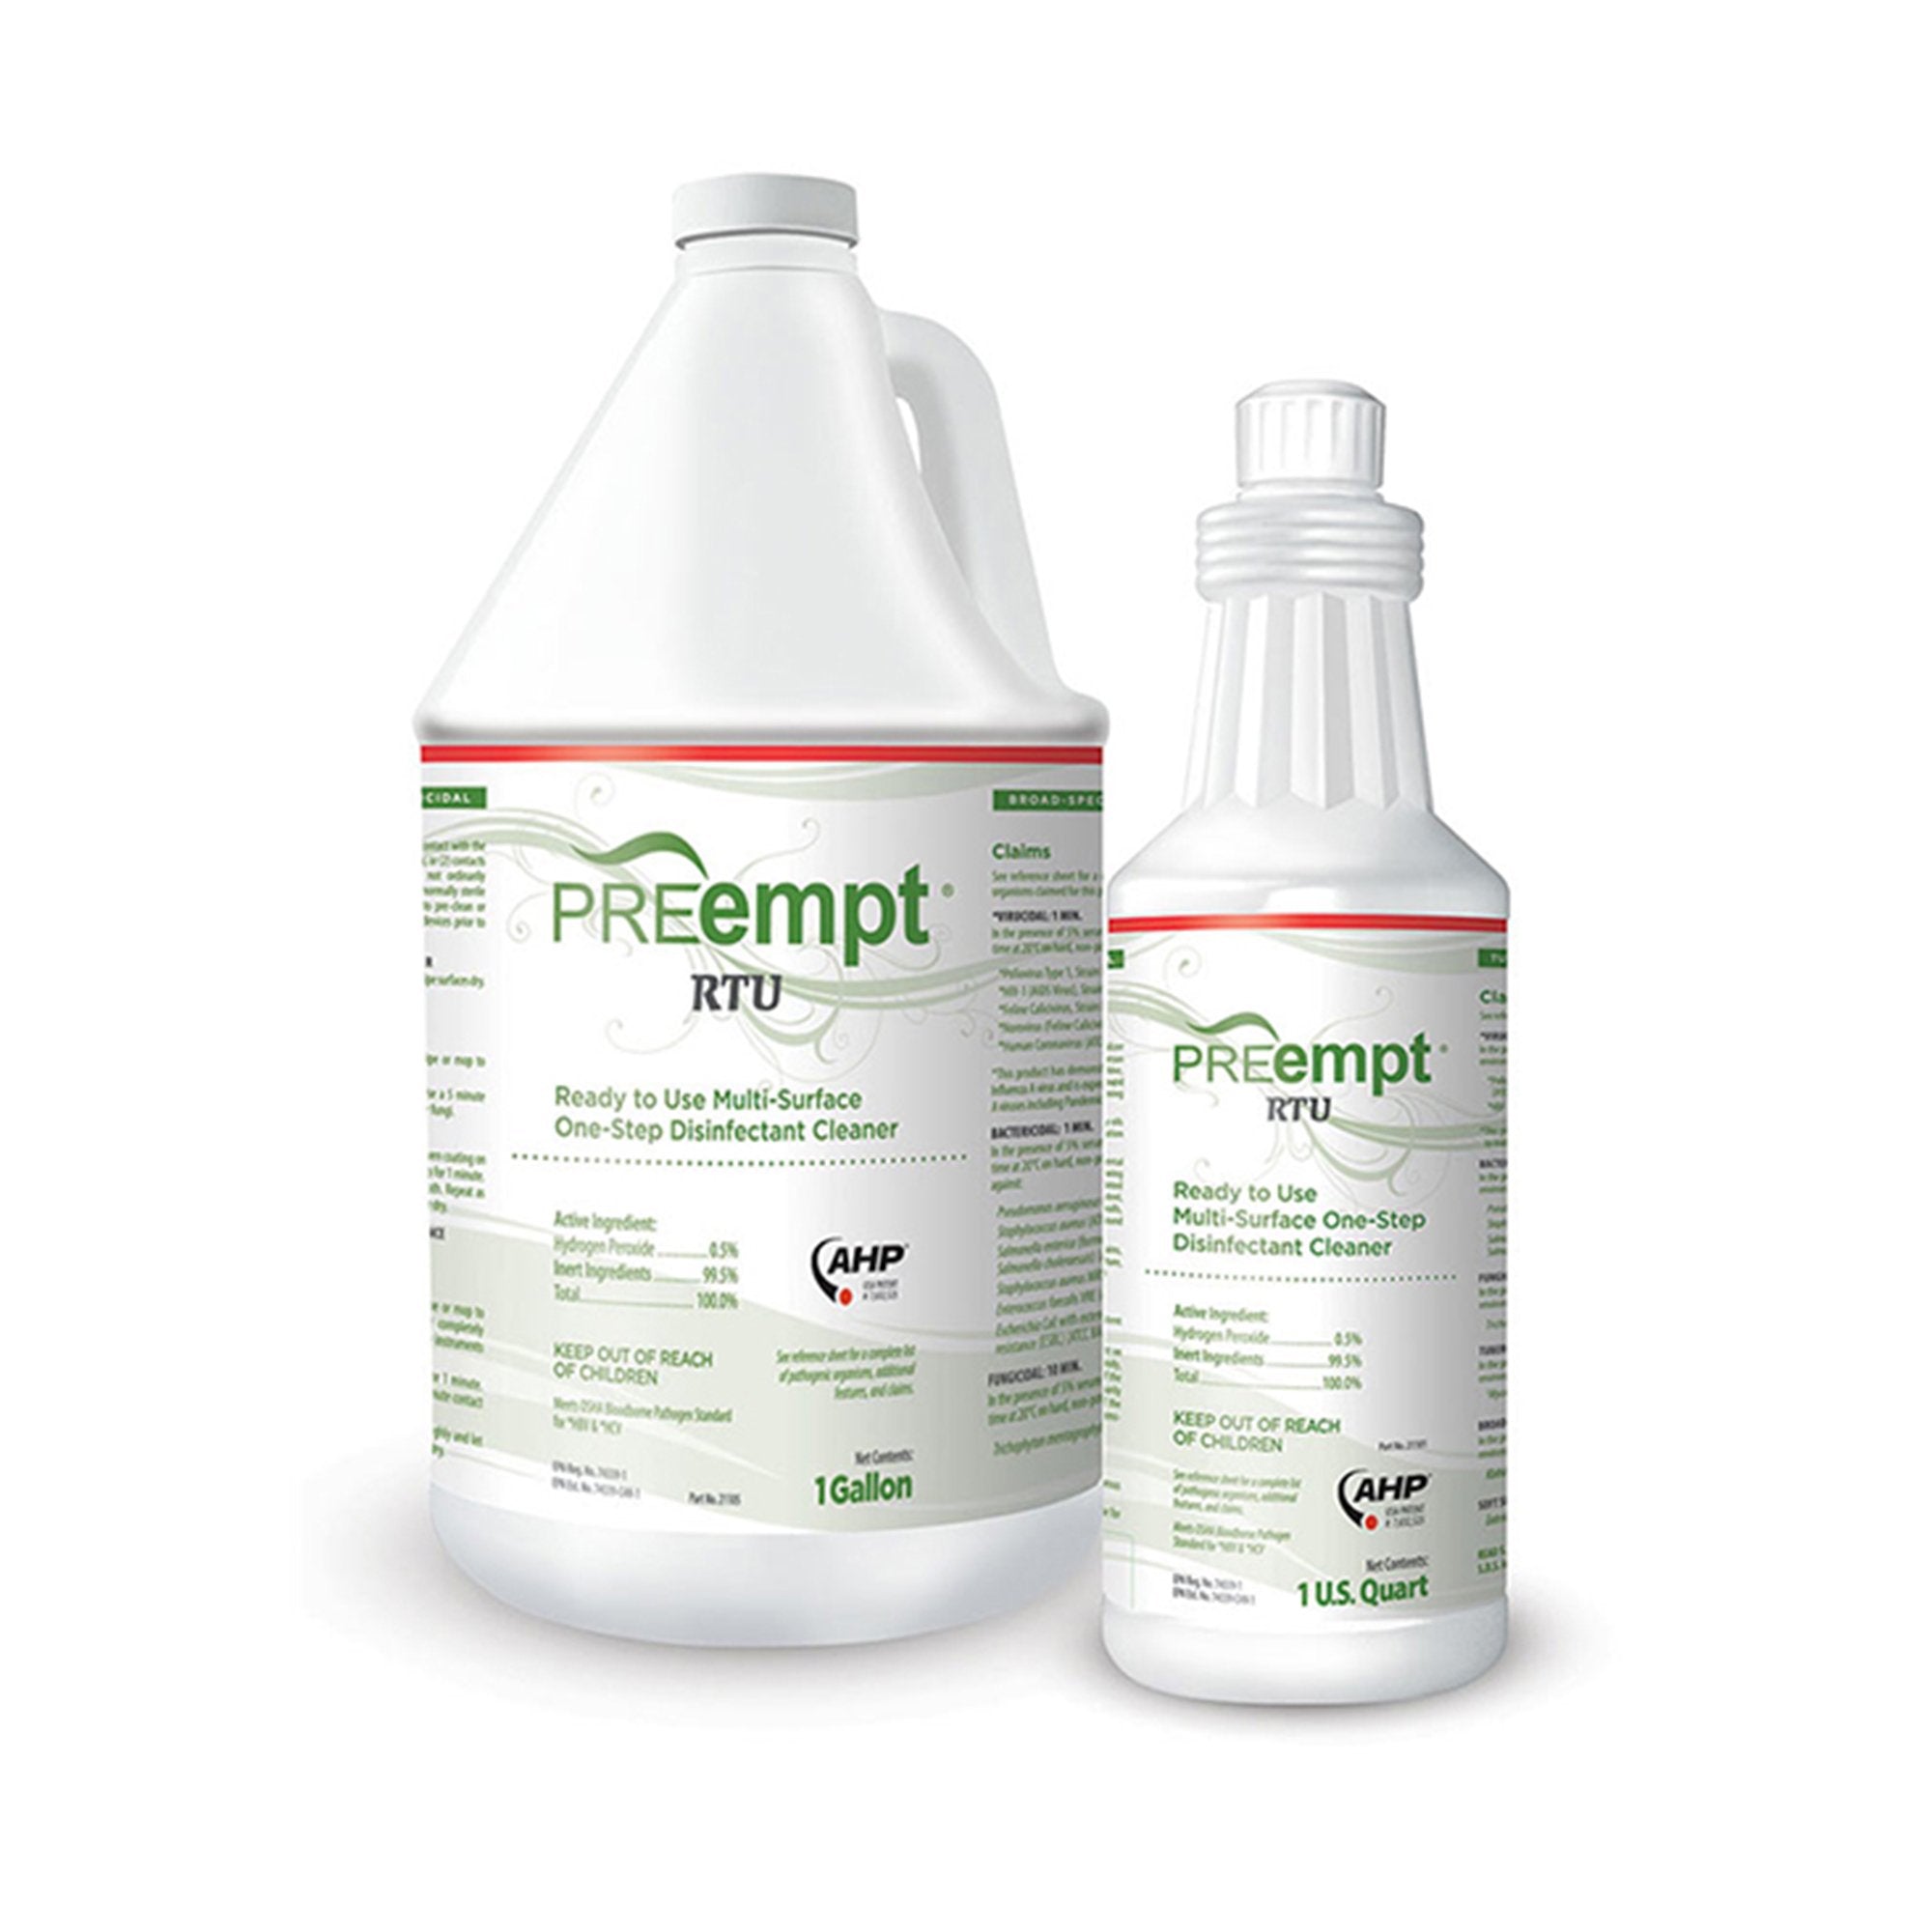 PREempt RTU Surface Disinfectant Cleaner Peroxide Based Manual Pour Liquid 32 oz. Bottle Scented NonSterile